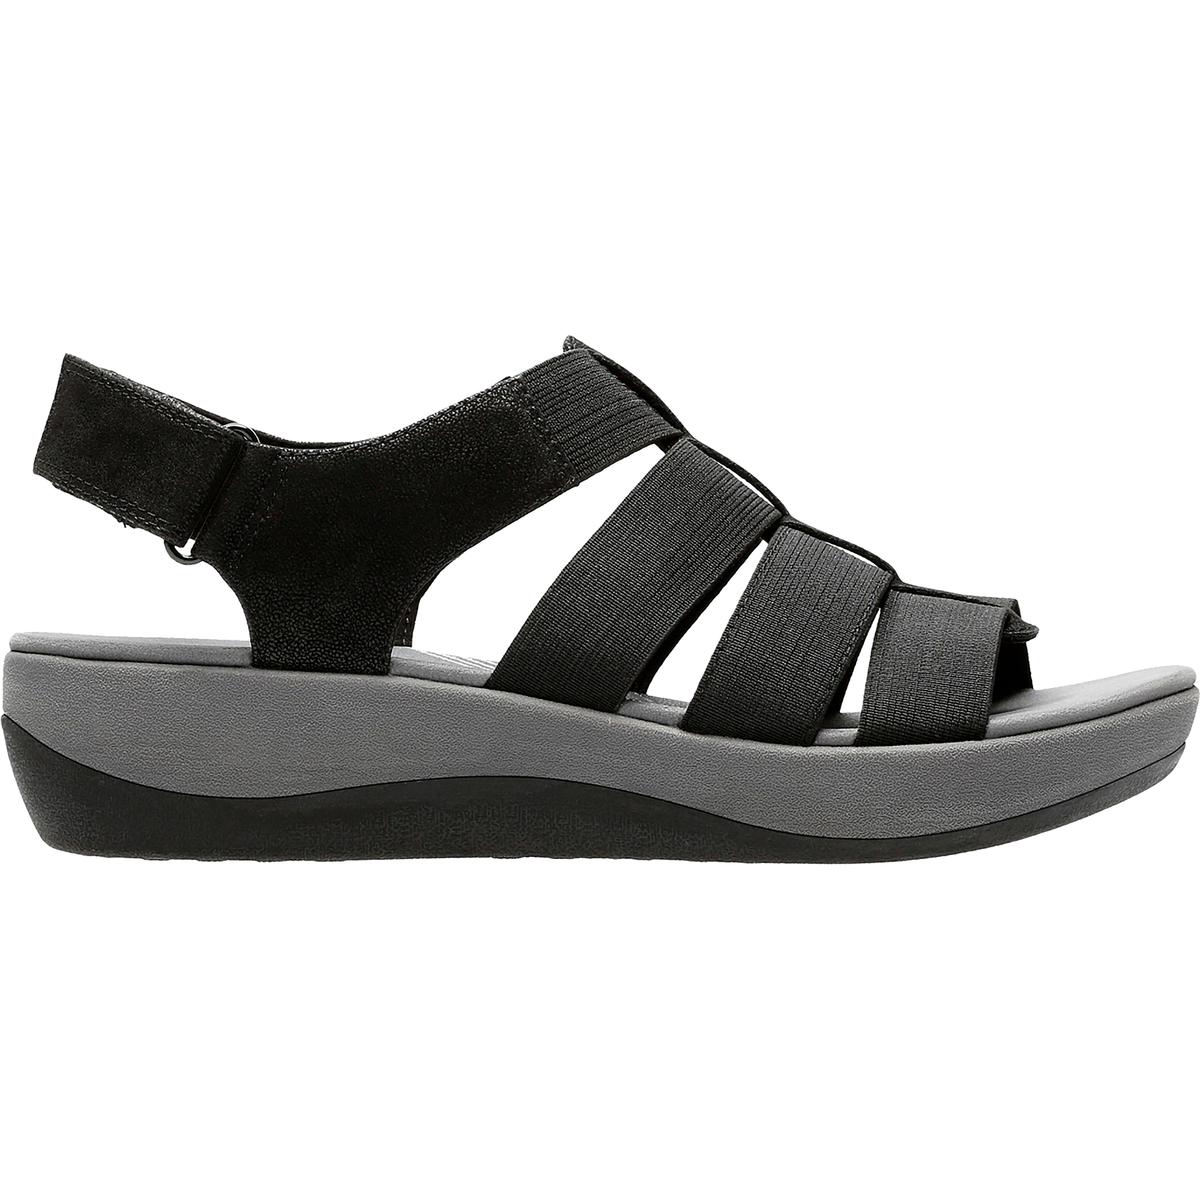 Cloudsteppers by Clarks Womens Arla Shaylie Black Strappy Sandals BHFO ...